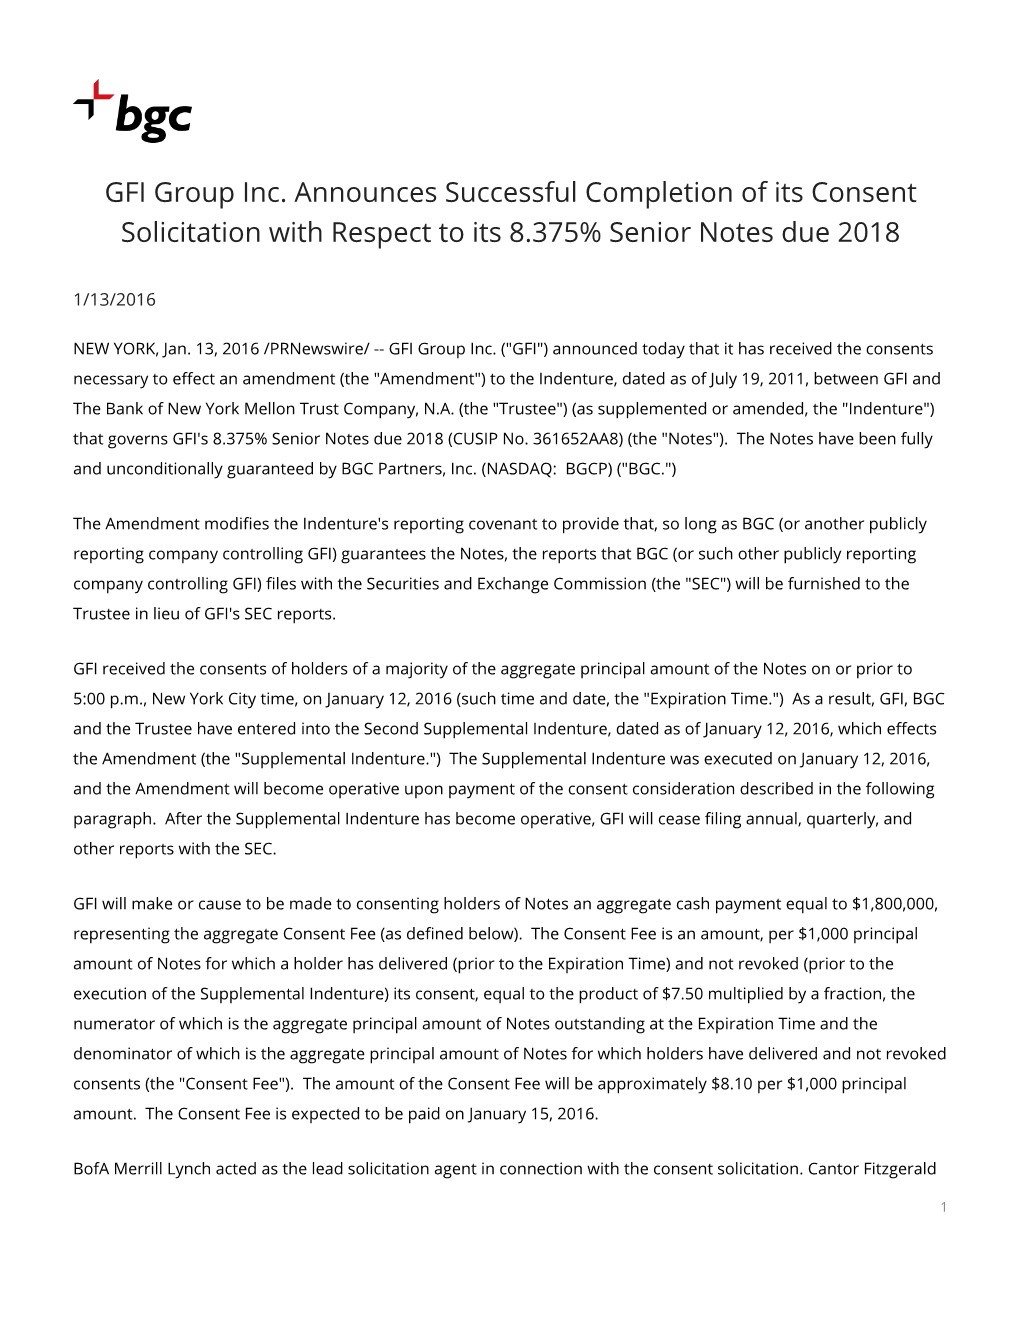 GFI Group Inc. Announces Successful Completion of Its Consent Solicitation with Respect to Its 8.375% Senior Notes Due 2018